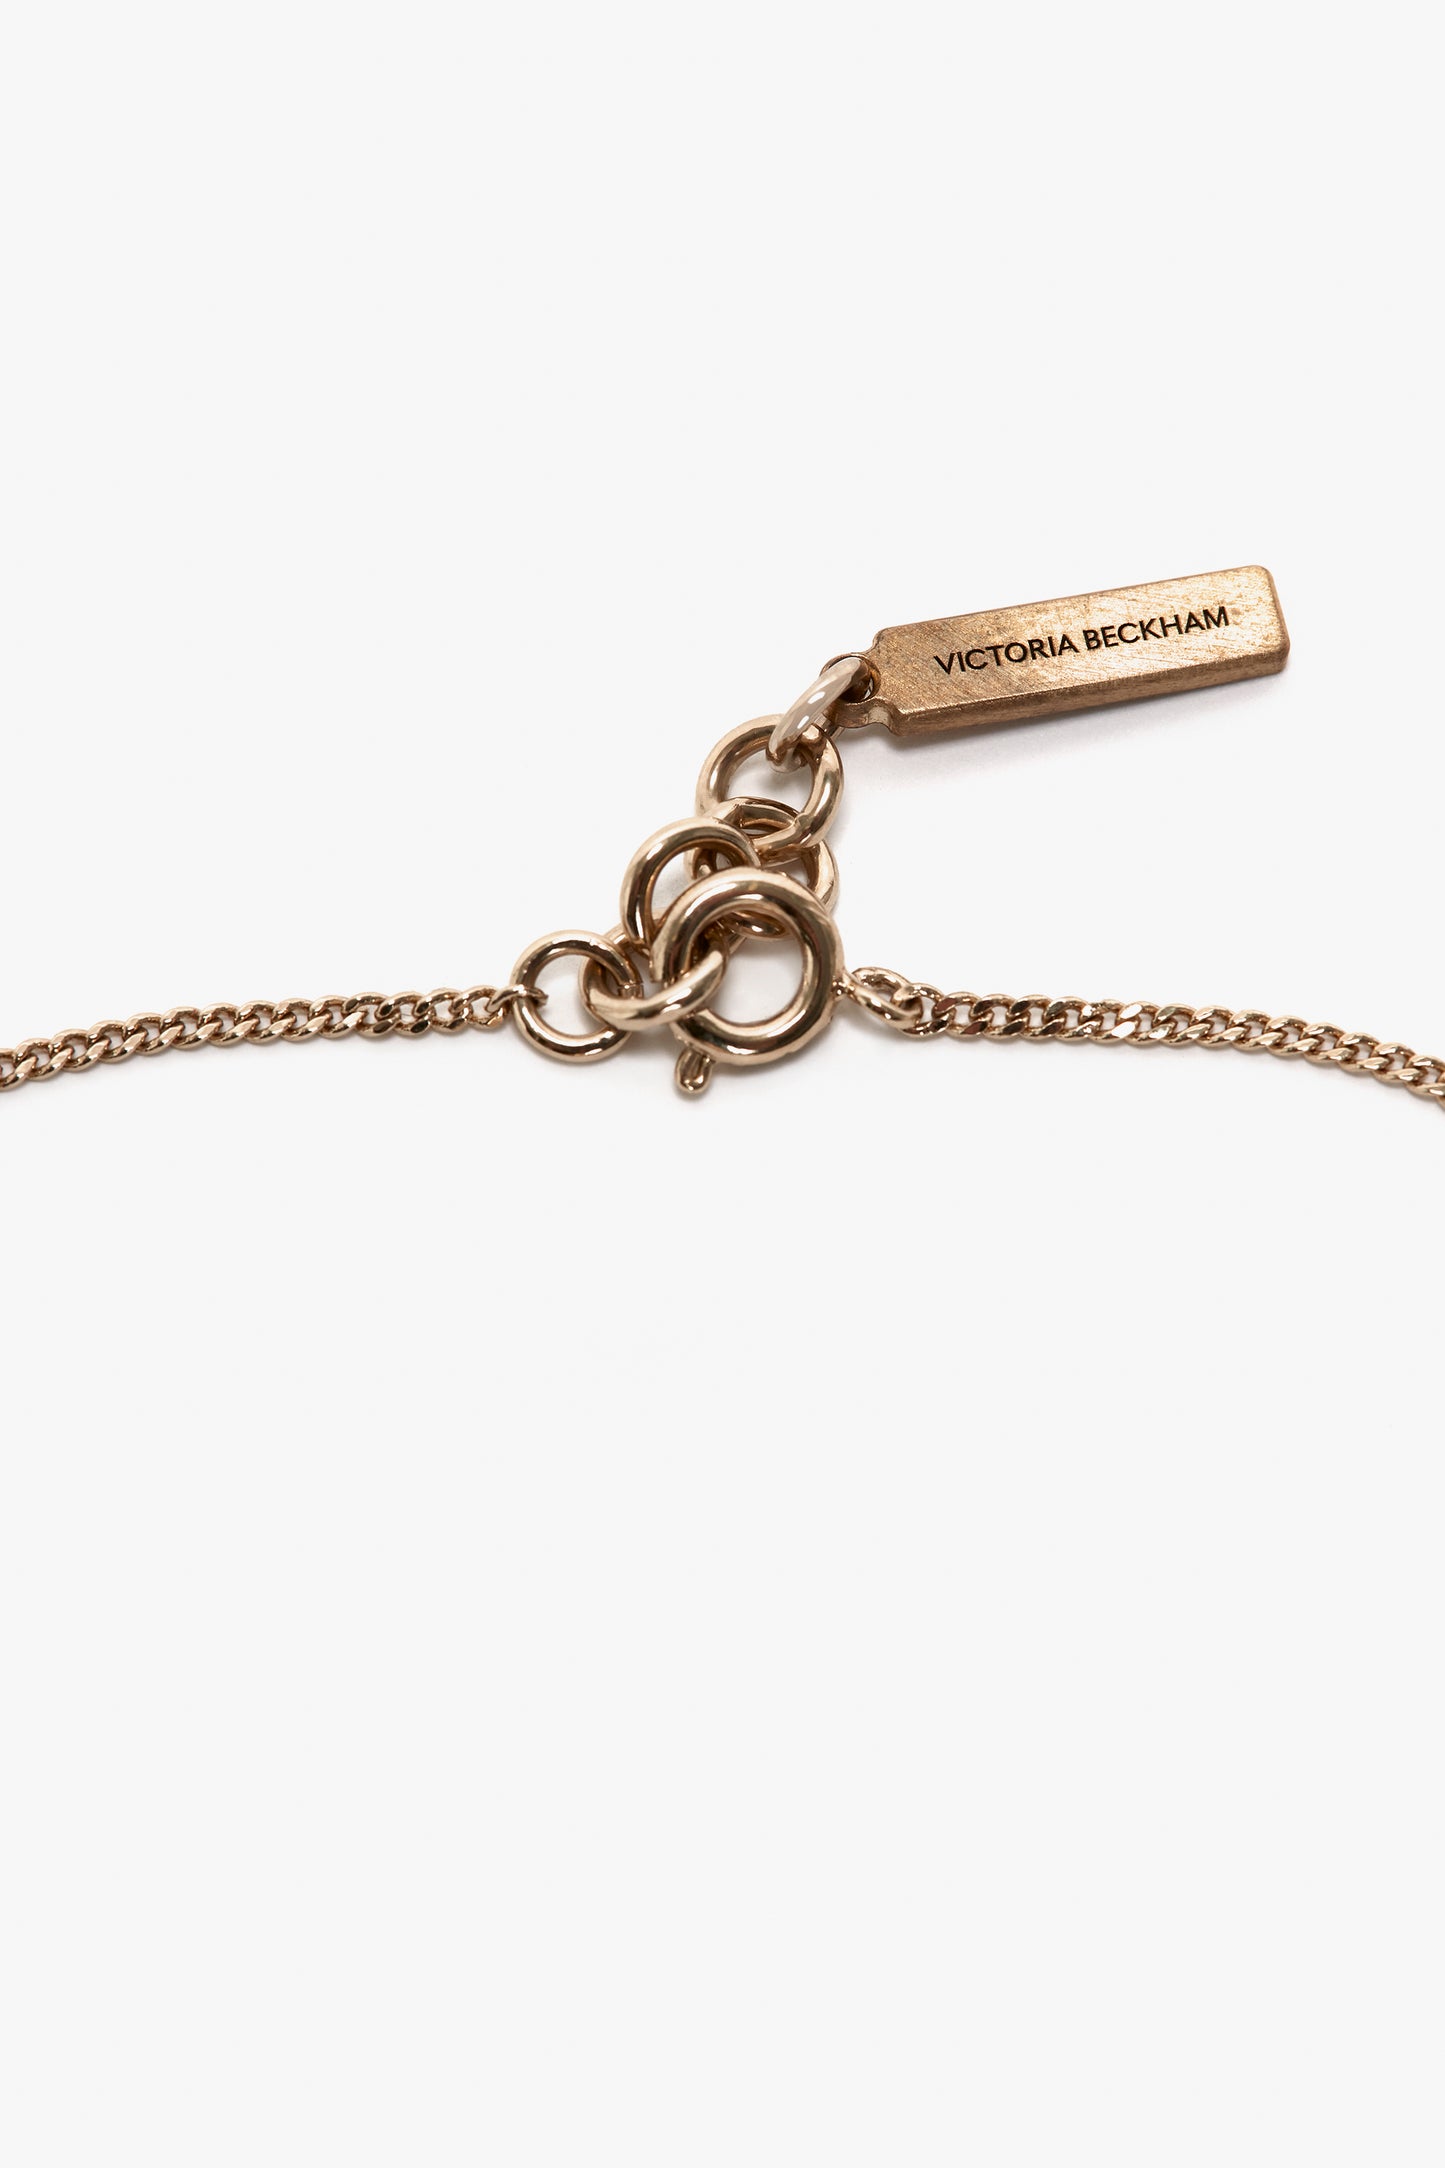 Close-up of an Exclusive Camellia Flower Bracelet In Gold clasp featuring interlocking rings and a rectangular tag engraved with the text "Victoria Beckham".